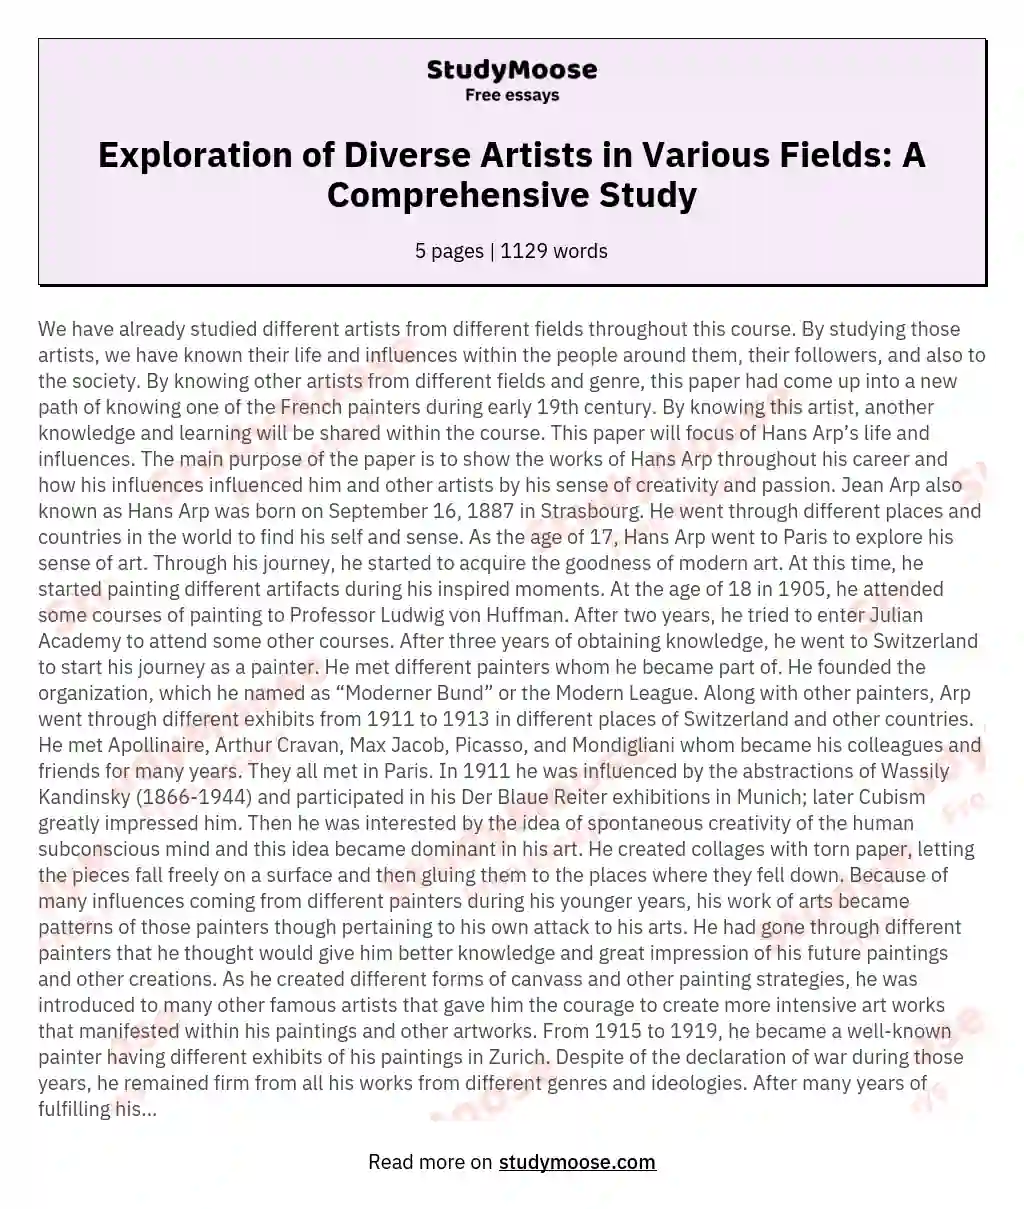 Exploration of Diverse Artists in Various Fields: A Comprehensive Study essay